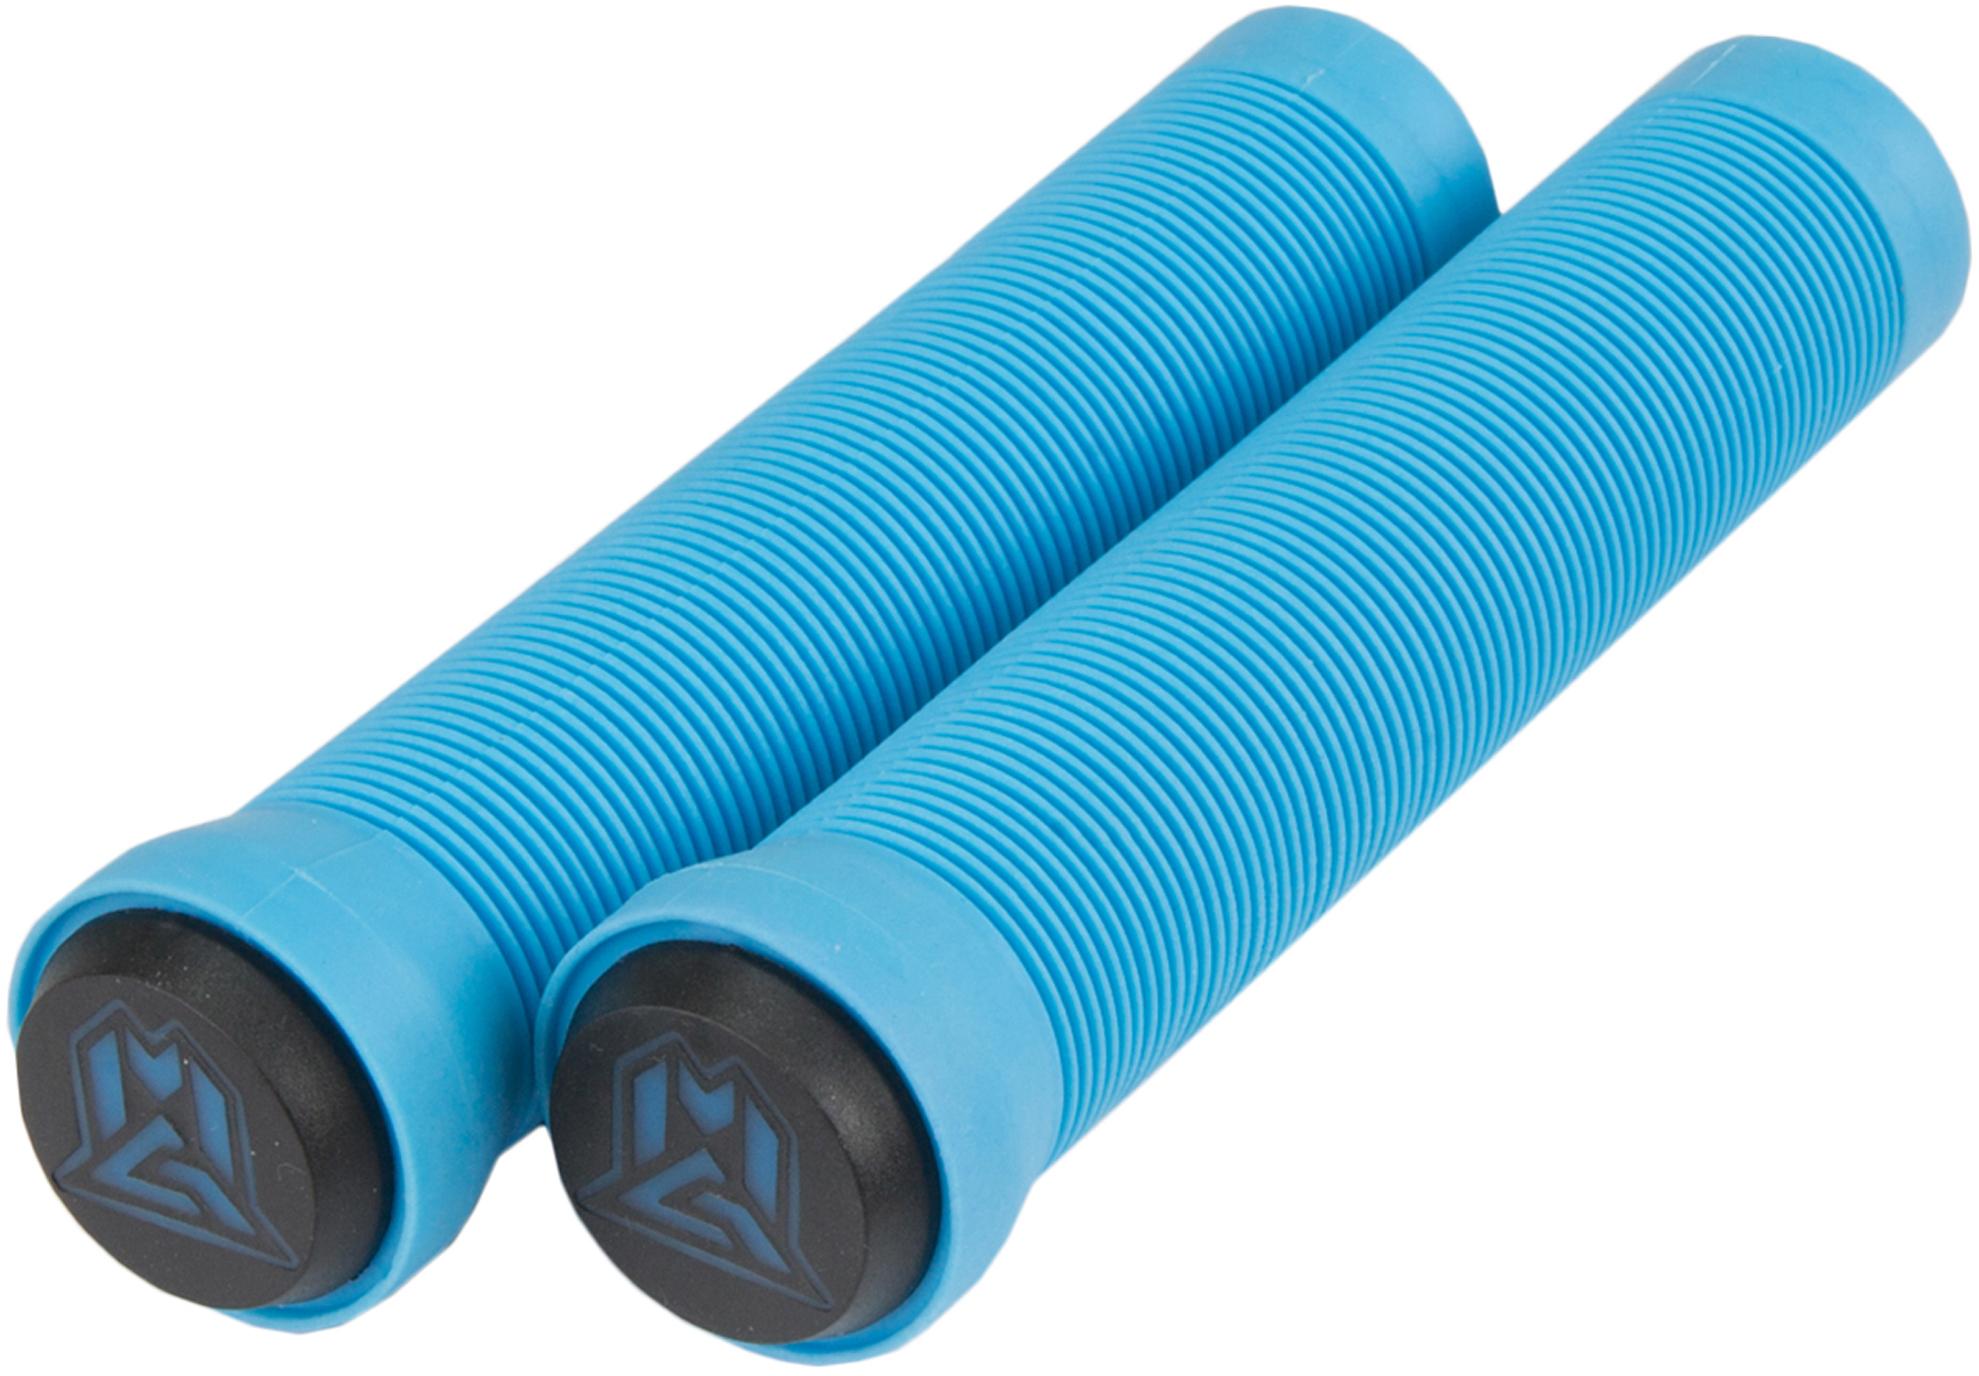 Mgp 150Mm Grind Grips With Bar Ends - Sky Blue